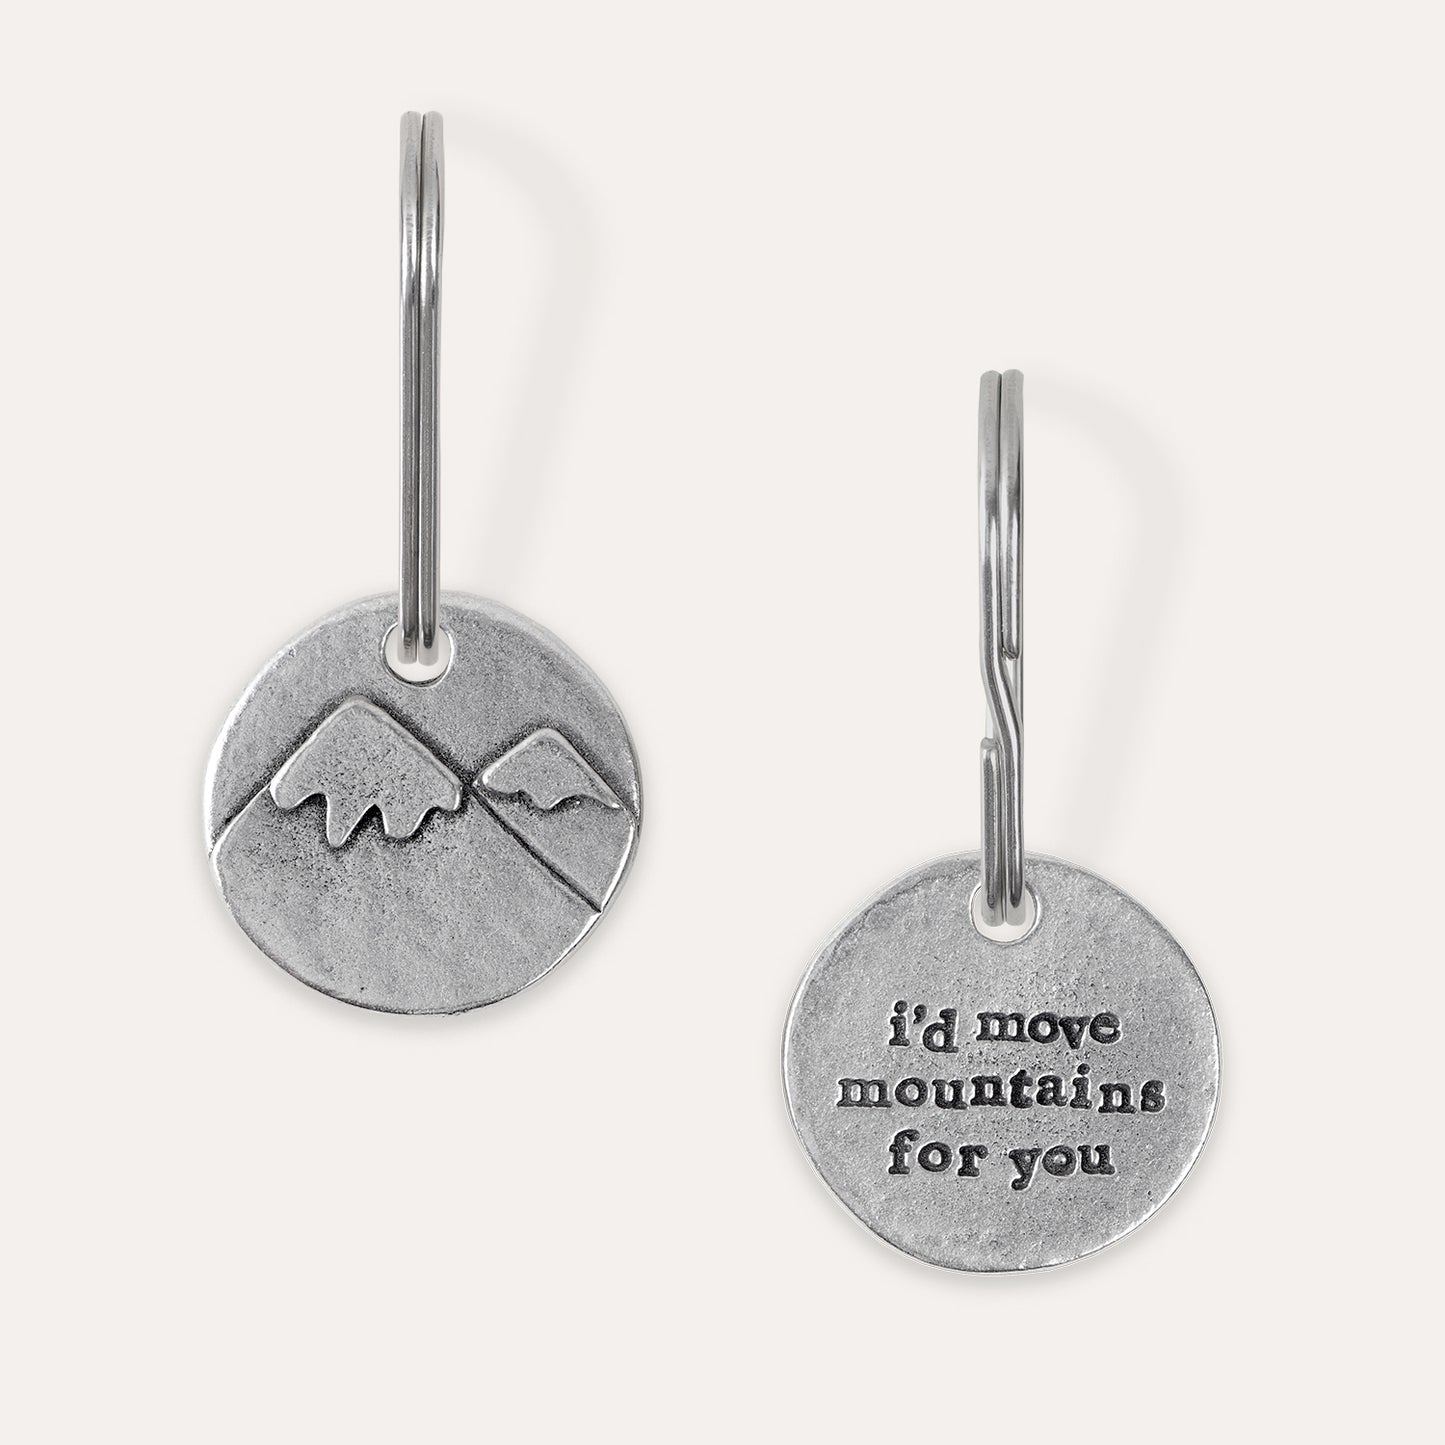 'I'd Move Mountains For You' Keyring